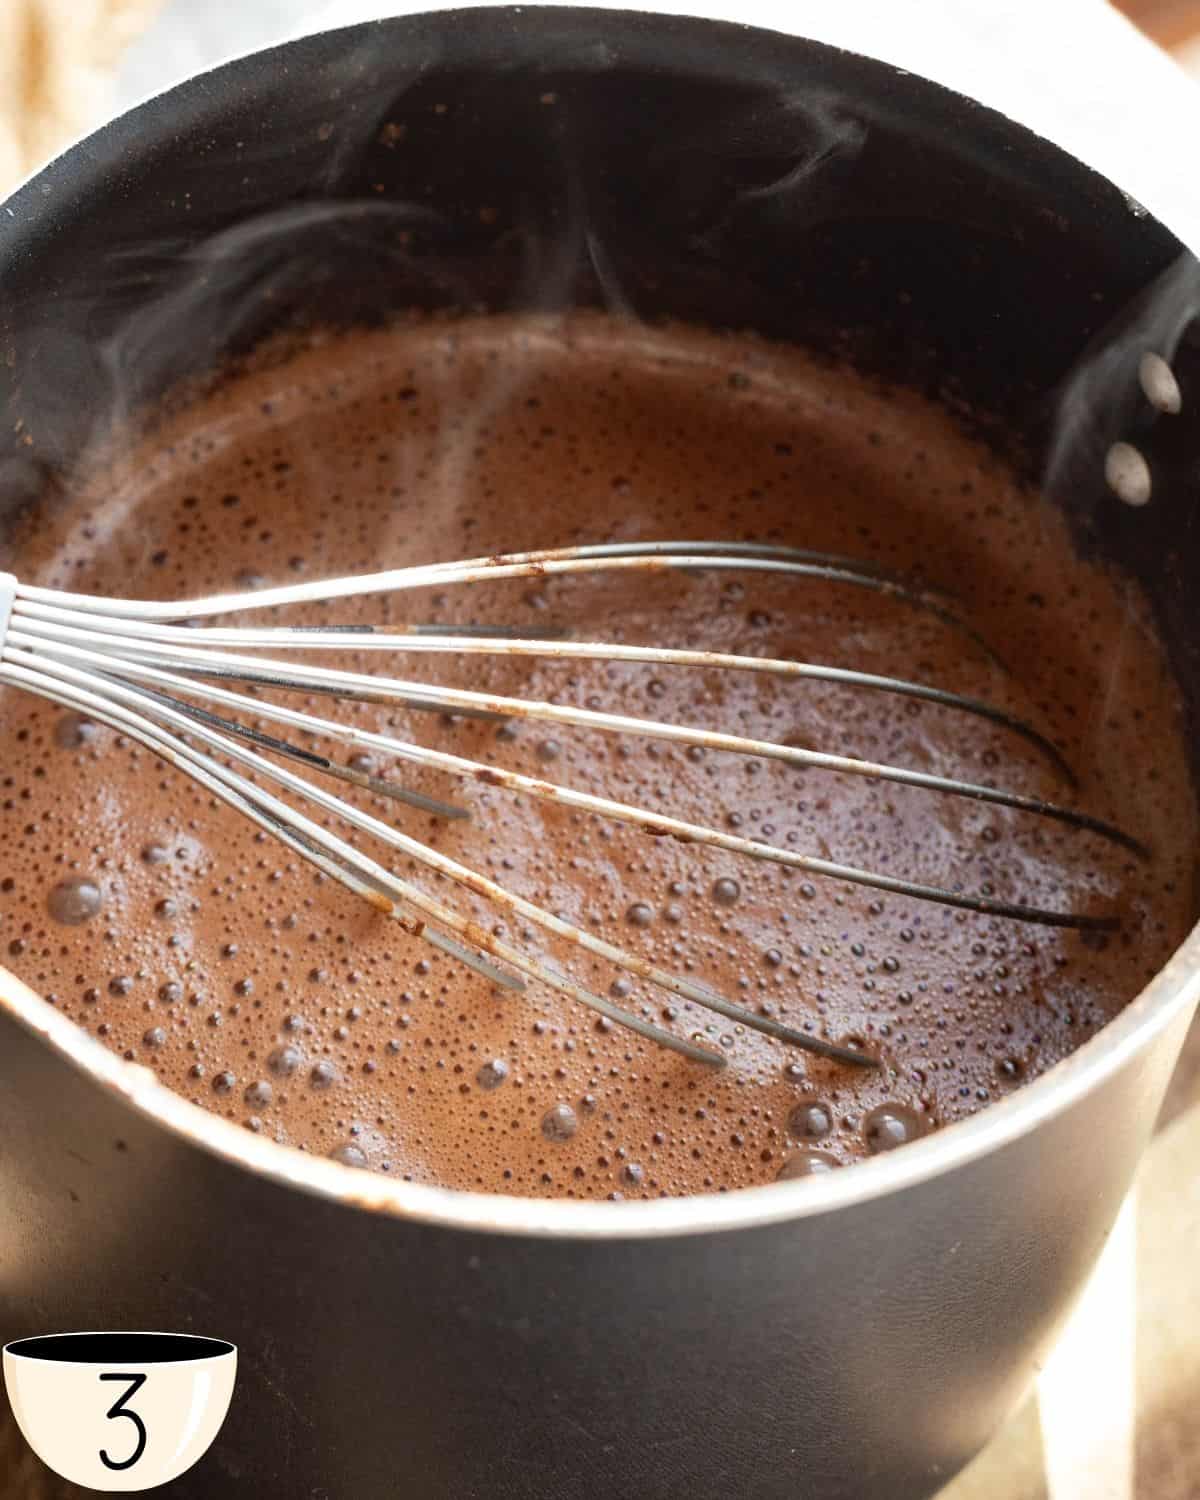 A pot on the stove with frothy hot chocolate with protein being whisked, demonstrating the cooking process of the beverage.